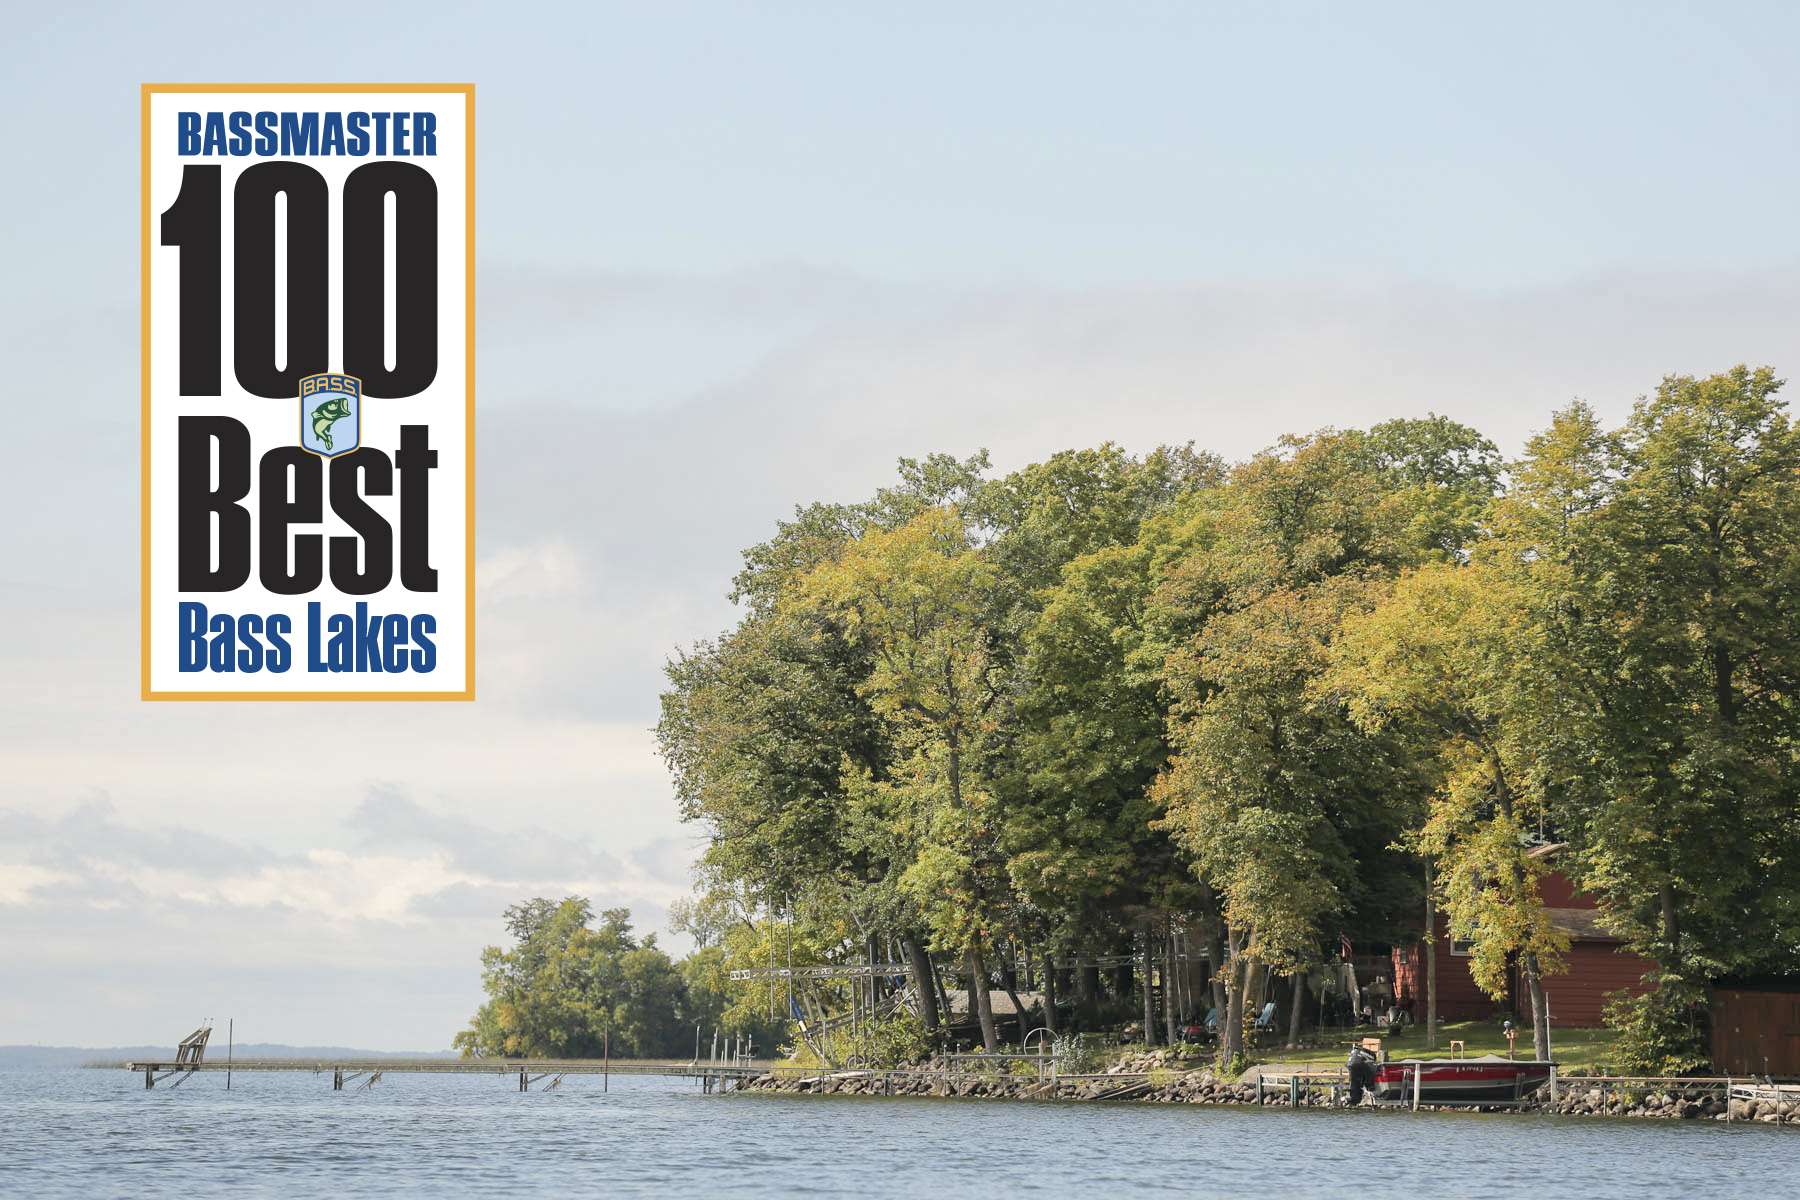 This is only the second B.A.S.S. event on Mille Lacs, which had been known for its incredible walleye fishing. When that population plummeted in the past several years, anglers took to smallmouth, which were large and abundant. After finishing sixth last year in <em>Bassmaster</em> Magazineâs rankings of the 100 Best Bass Lakes, Mille Lacs took the top spot when the rankings came out this summer.